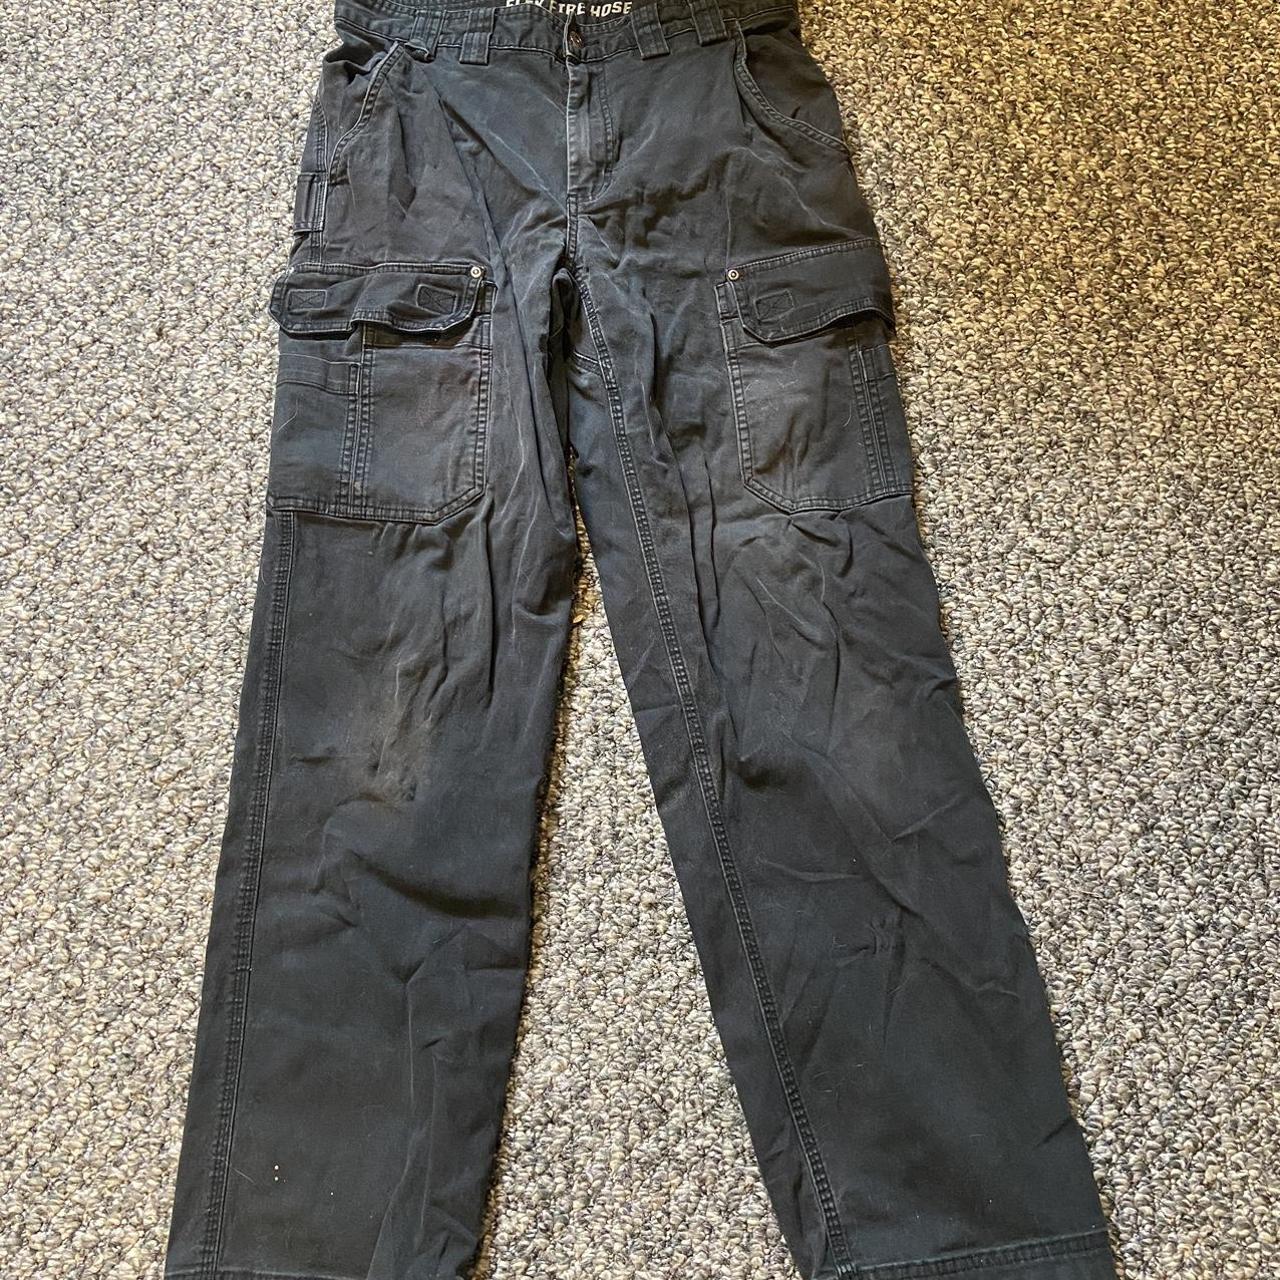 Duluth Trading Company Men's Trousers | Depop